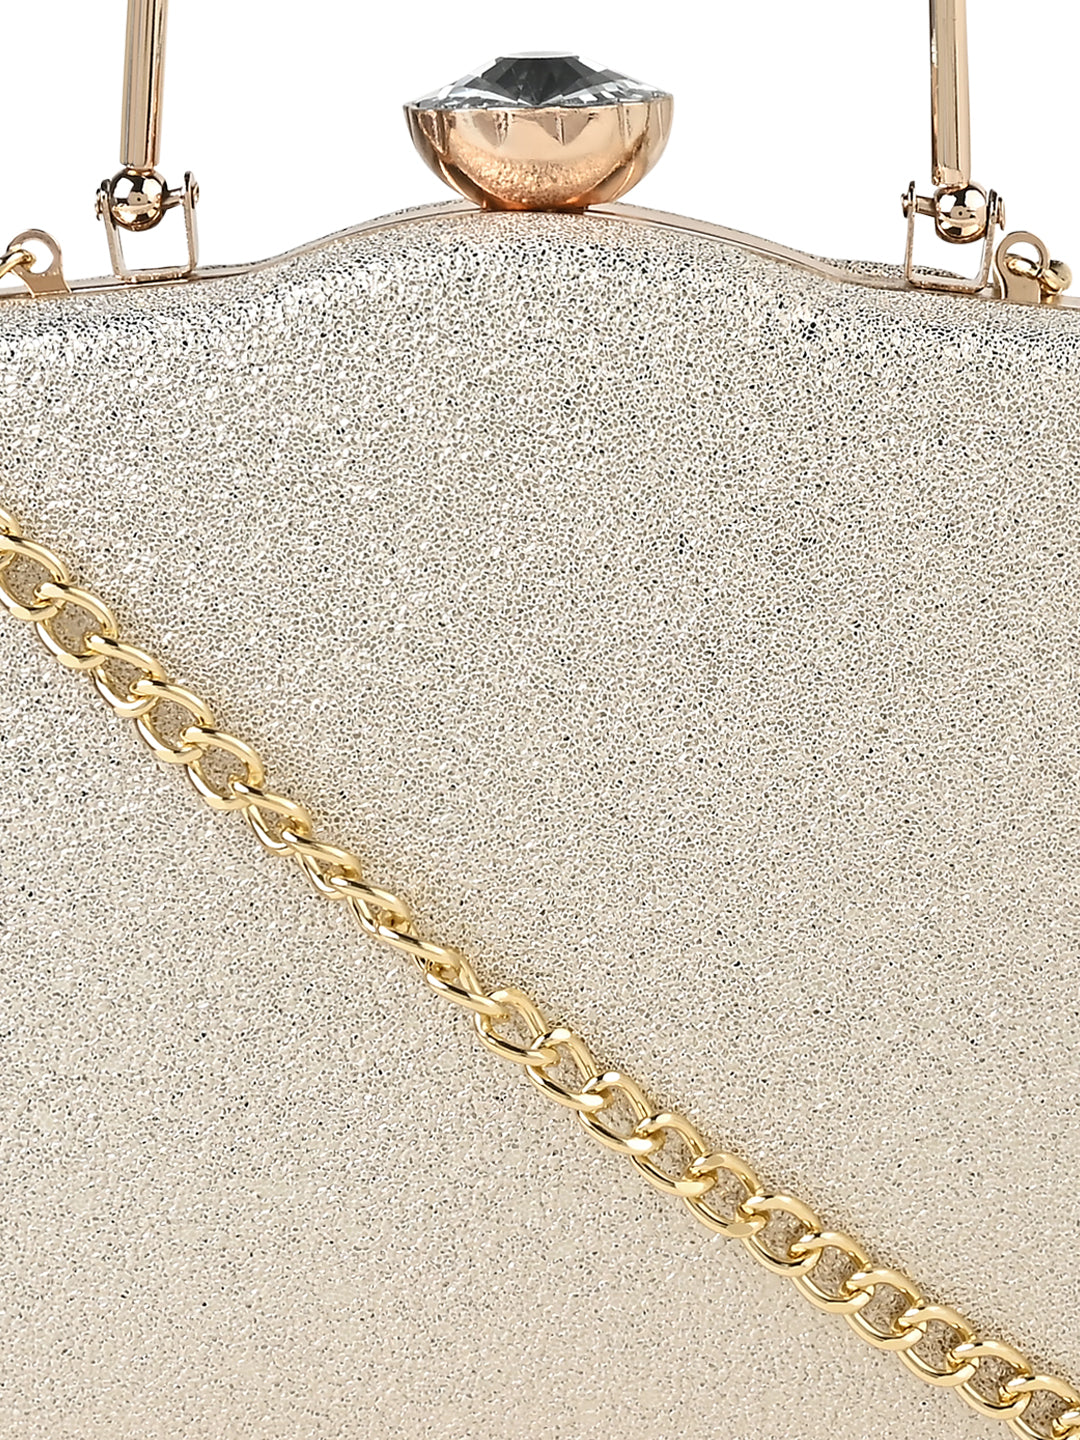 A shiny surface Vdesi Plain gold clutch with a chain handle.